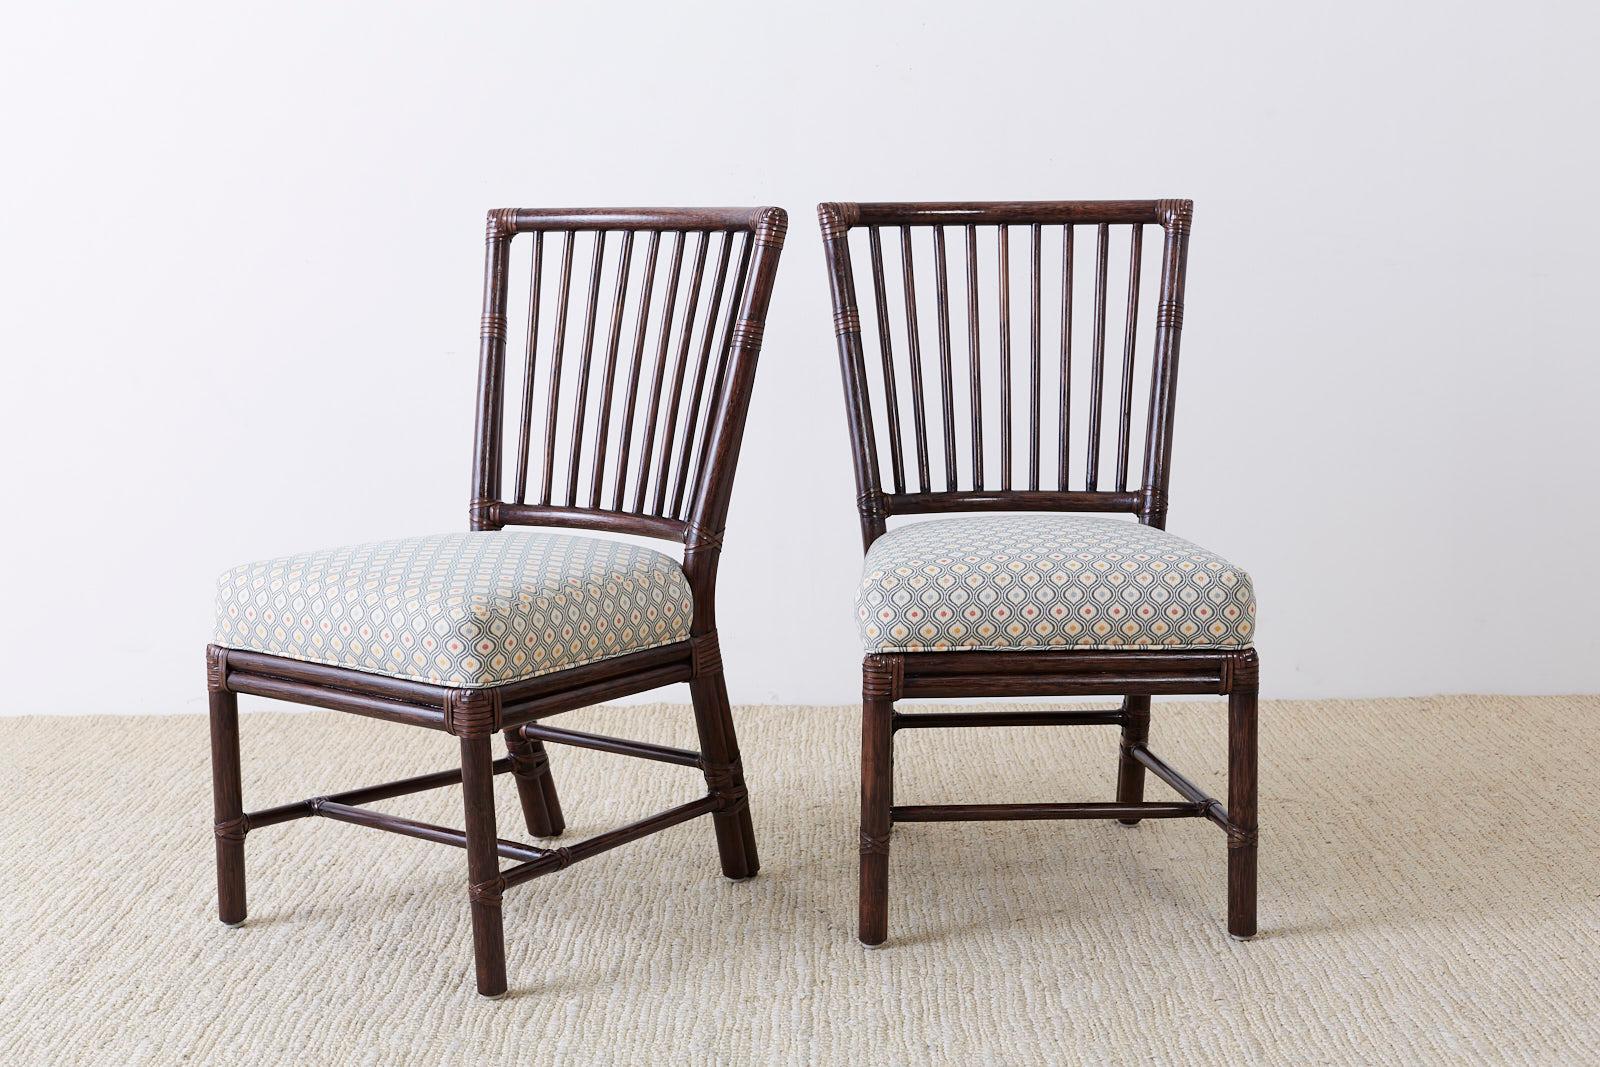 American Set of Ten Orlando Diaz-Azcuy for McGuire Rattan Dining Chairs